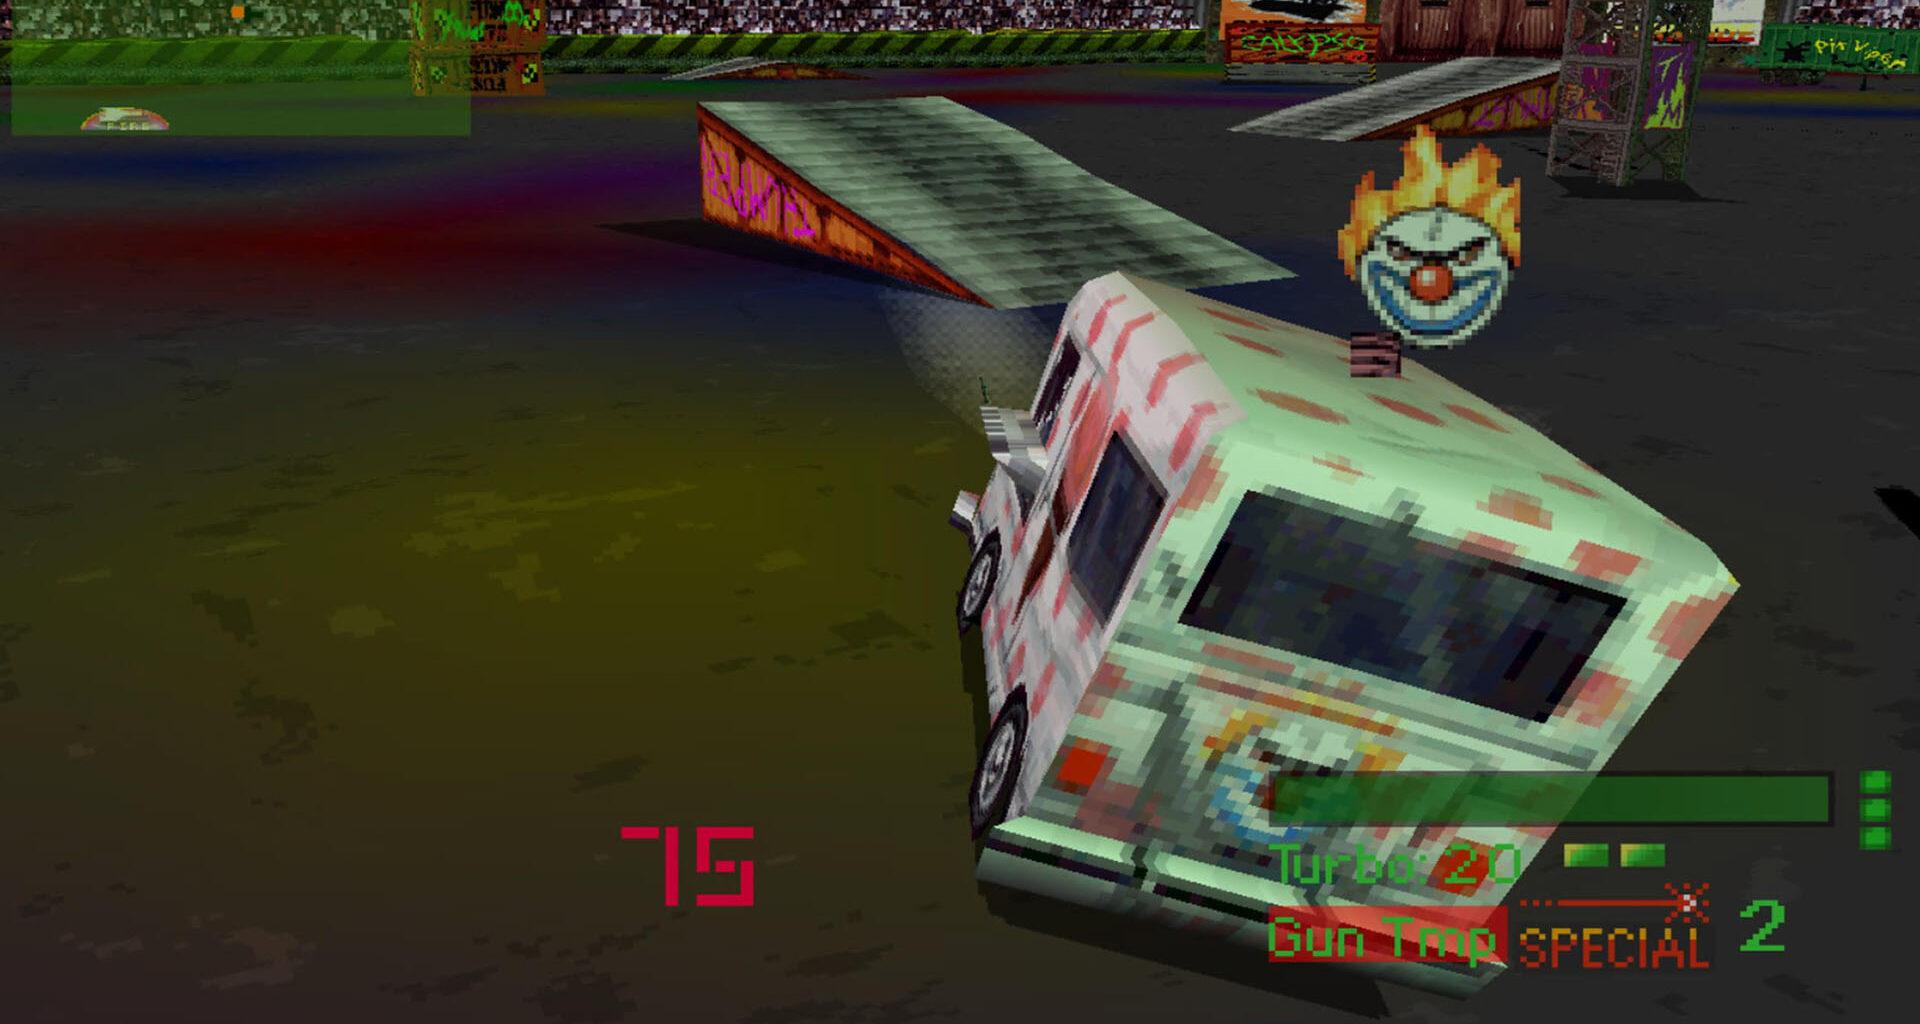 Original Twisted Metal and sequel set for PS4 and PS5 re-release